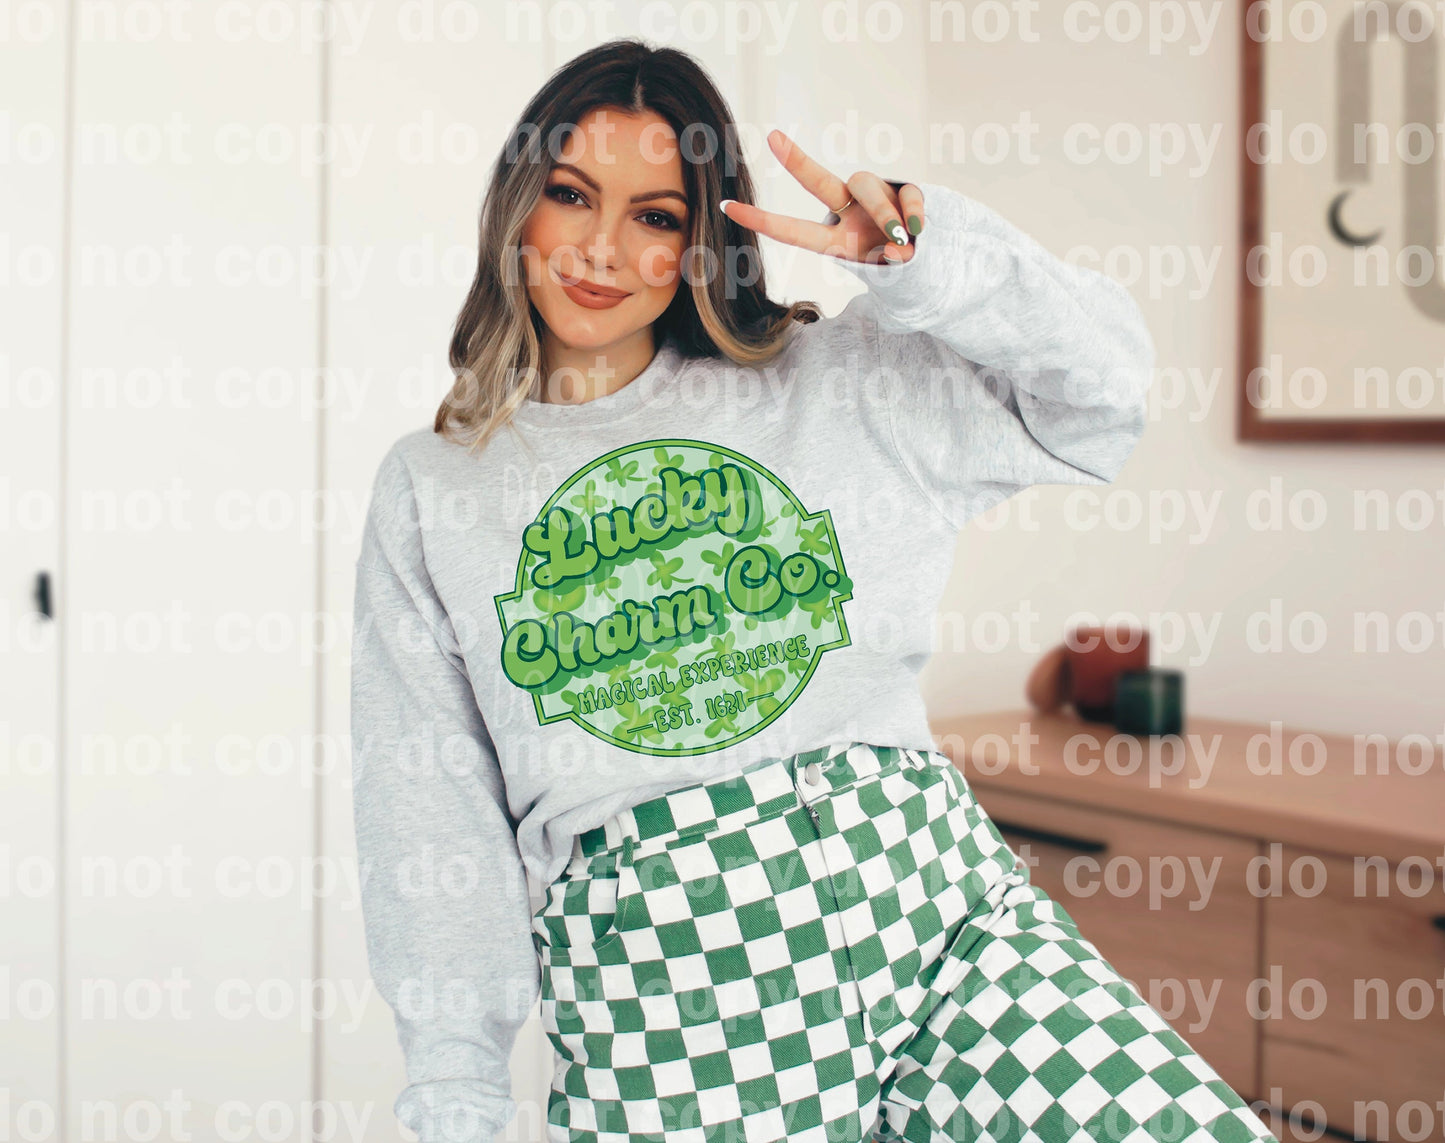 Lucky Charm Co. Magical Experience Dream Print or Sublimation Print